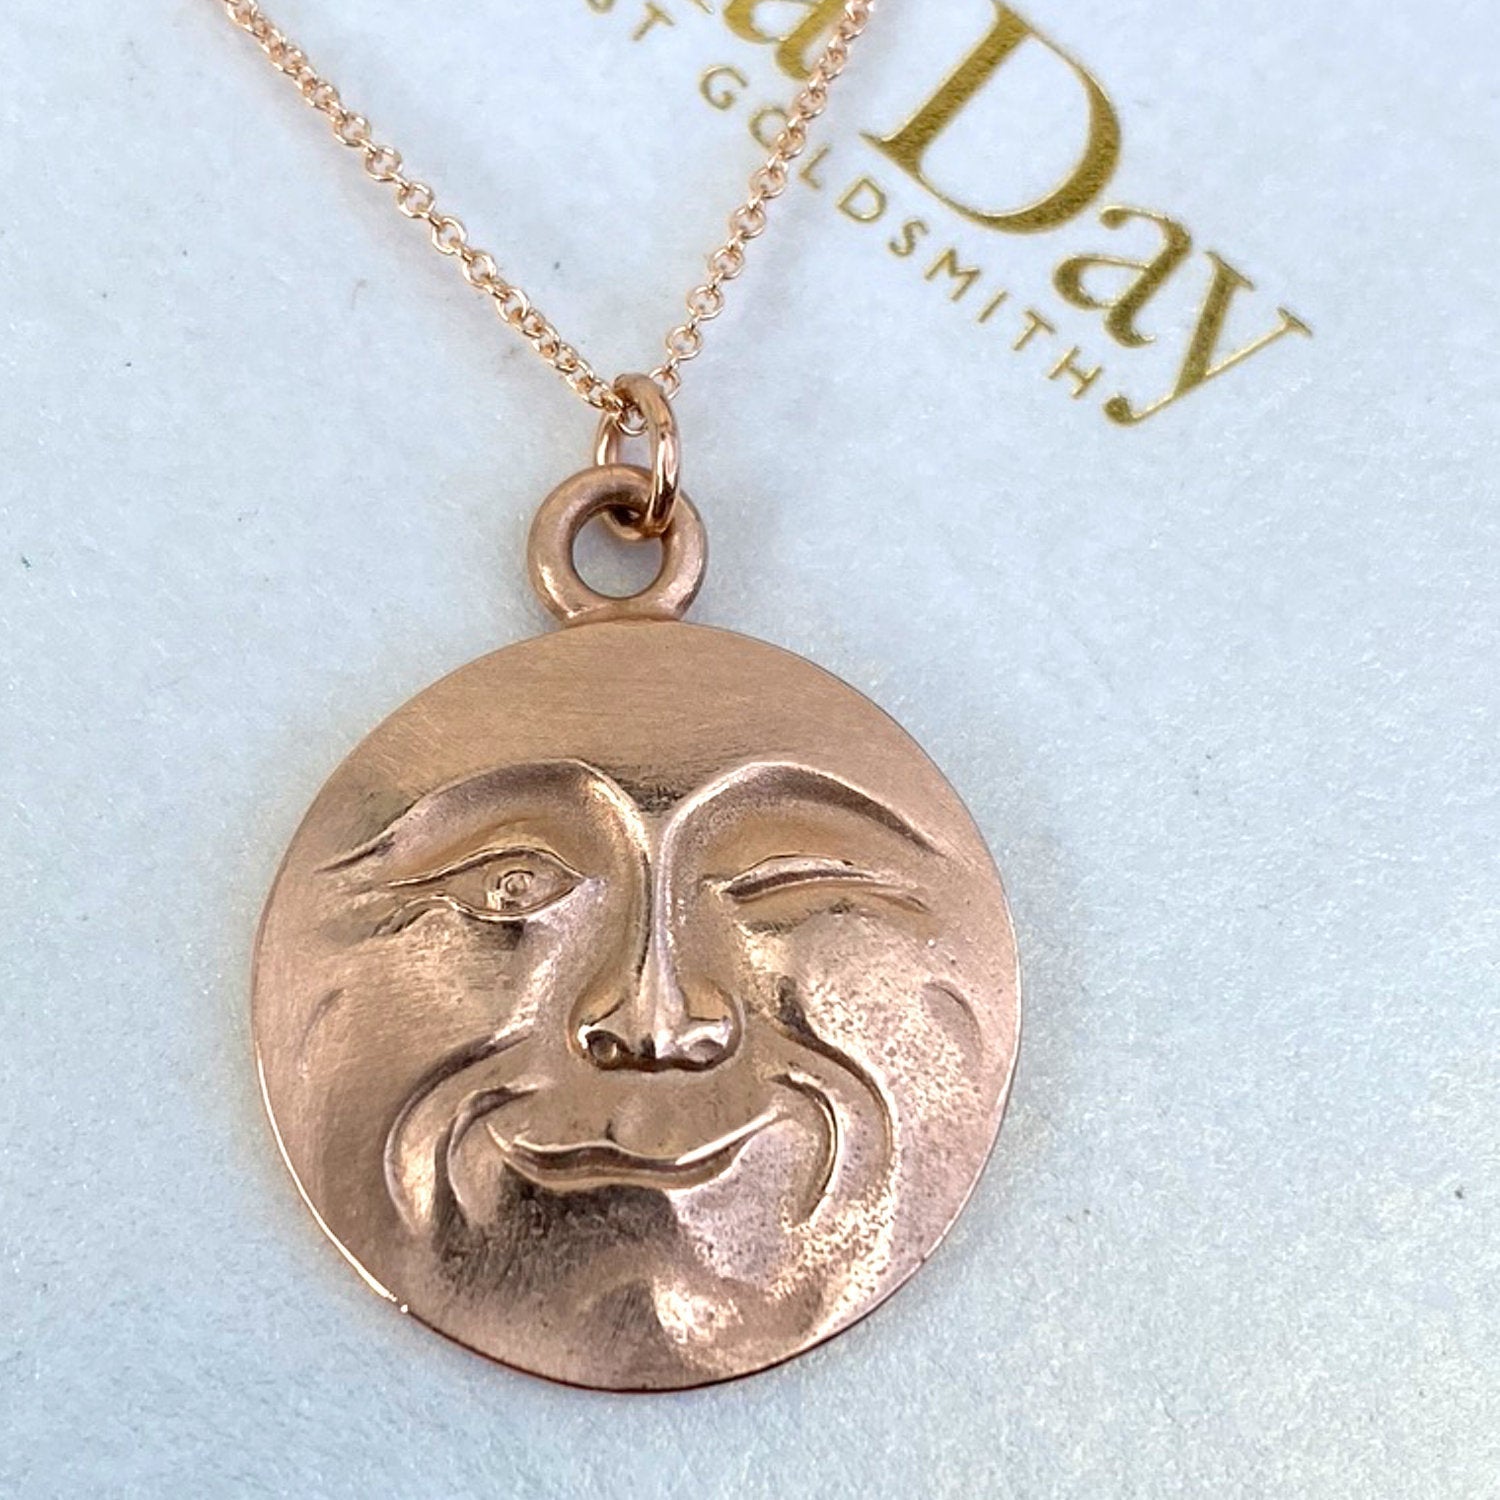 Solid gold man in the moon hand made necklace, La Luna charm